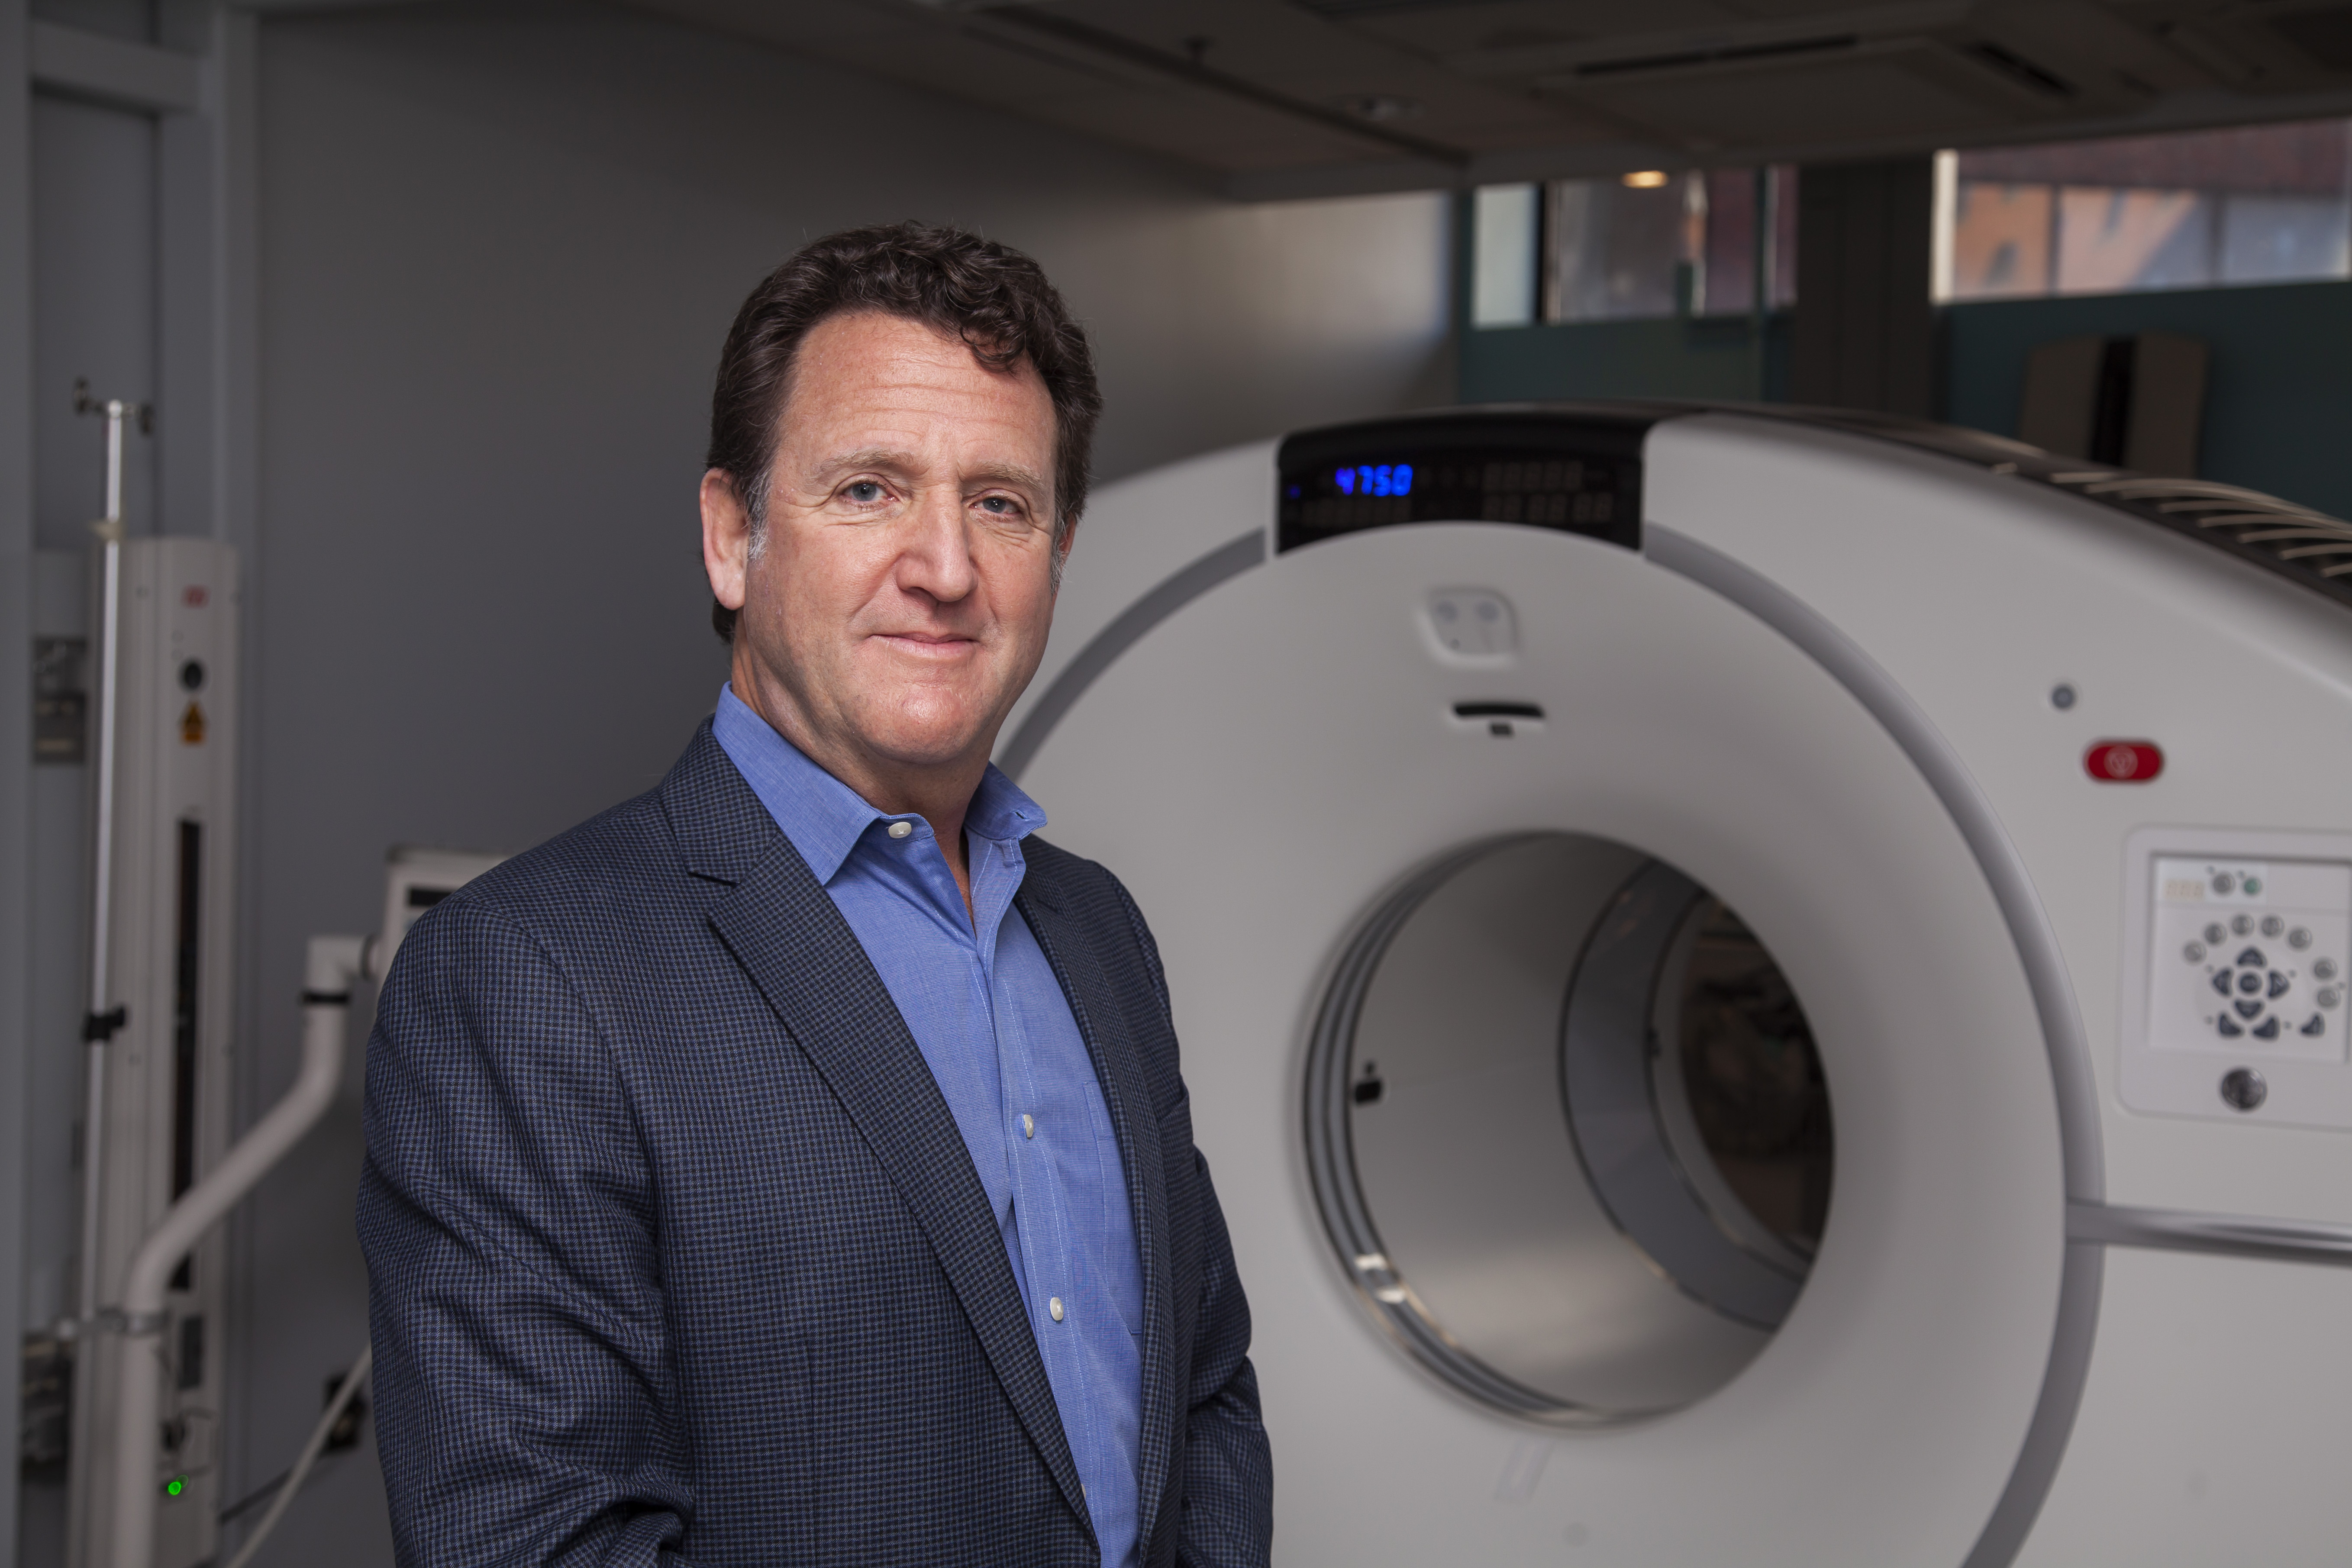 QEII oncologist Dr. Daniel Rayson describes the gallium-68 DOTATATE tracer as a “game-changer.”